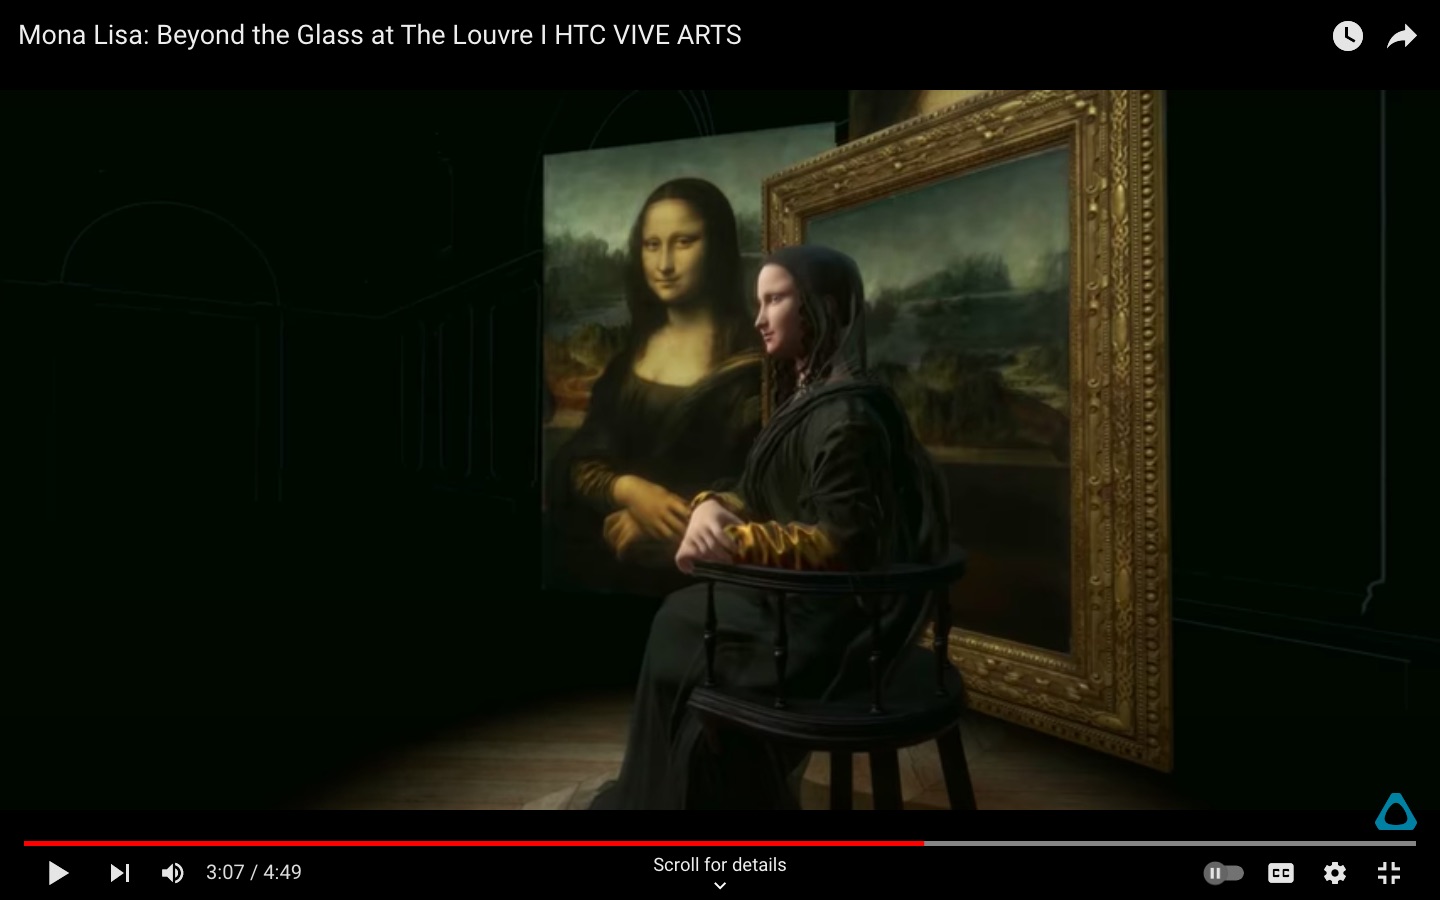 A video about the creation of the Louvre’s VR experience *Mona Lisa: Beyond the Glass*. Includes interviews with The Louvre’s curators and Emissive VR programmers about the creative and technical process of creating the VR experience. The video interweaves these interviews with footage from programmers working on the project and footage of the final product.